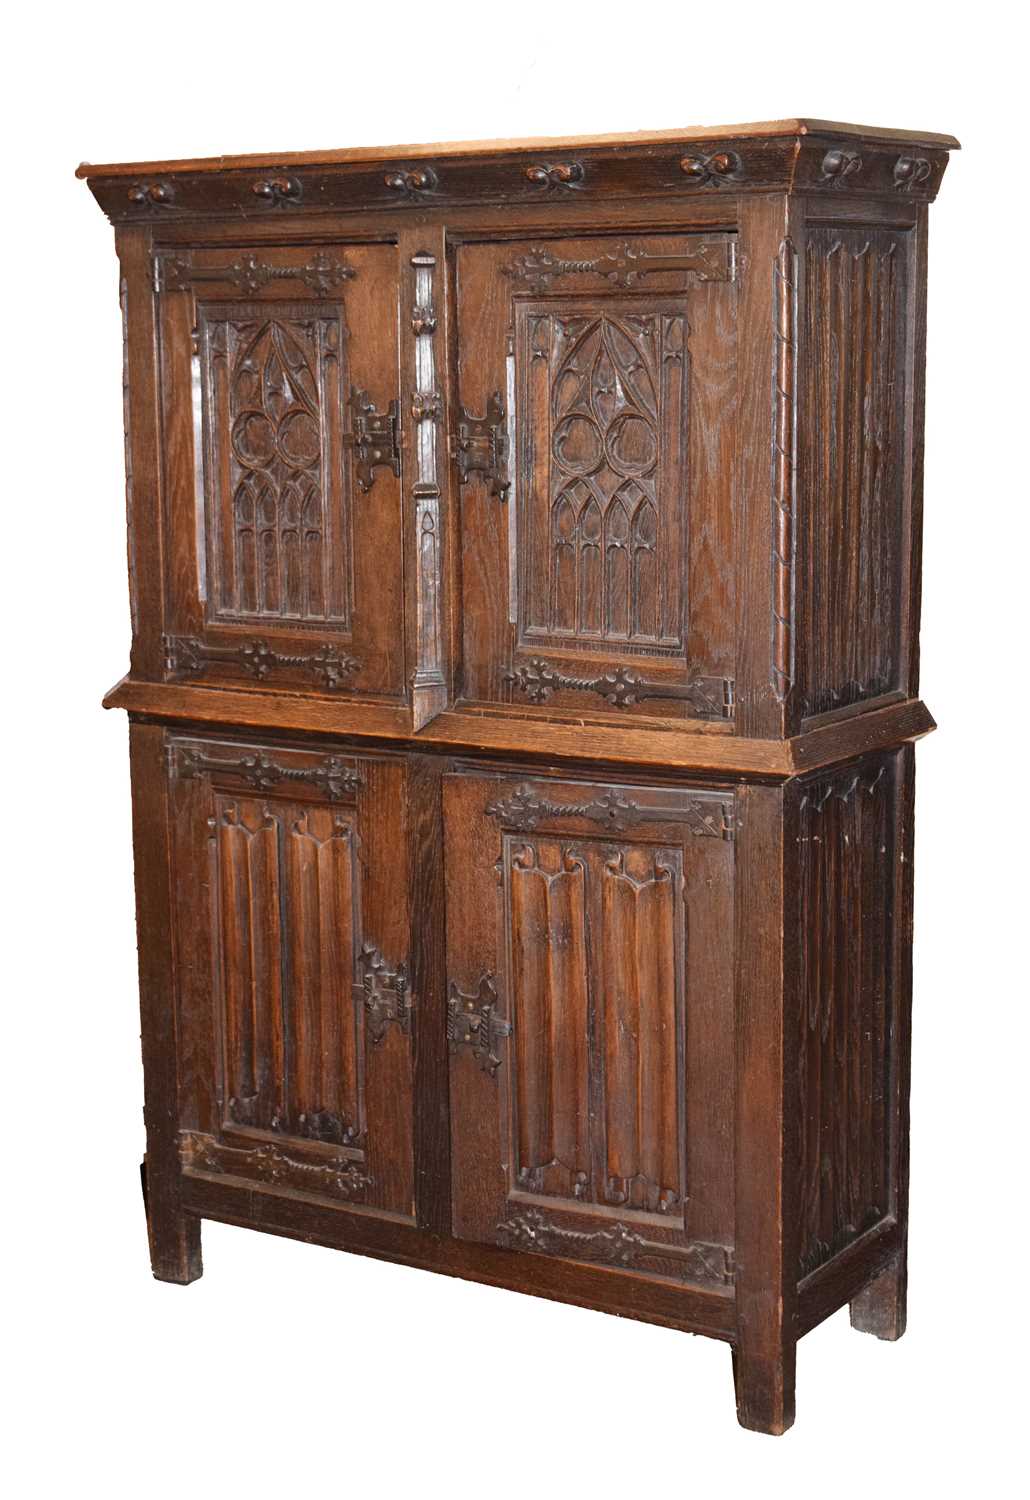 Early 20th century oak gothic revival two section cupboard